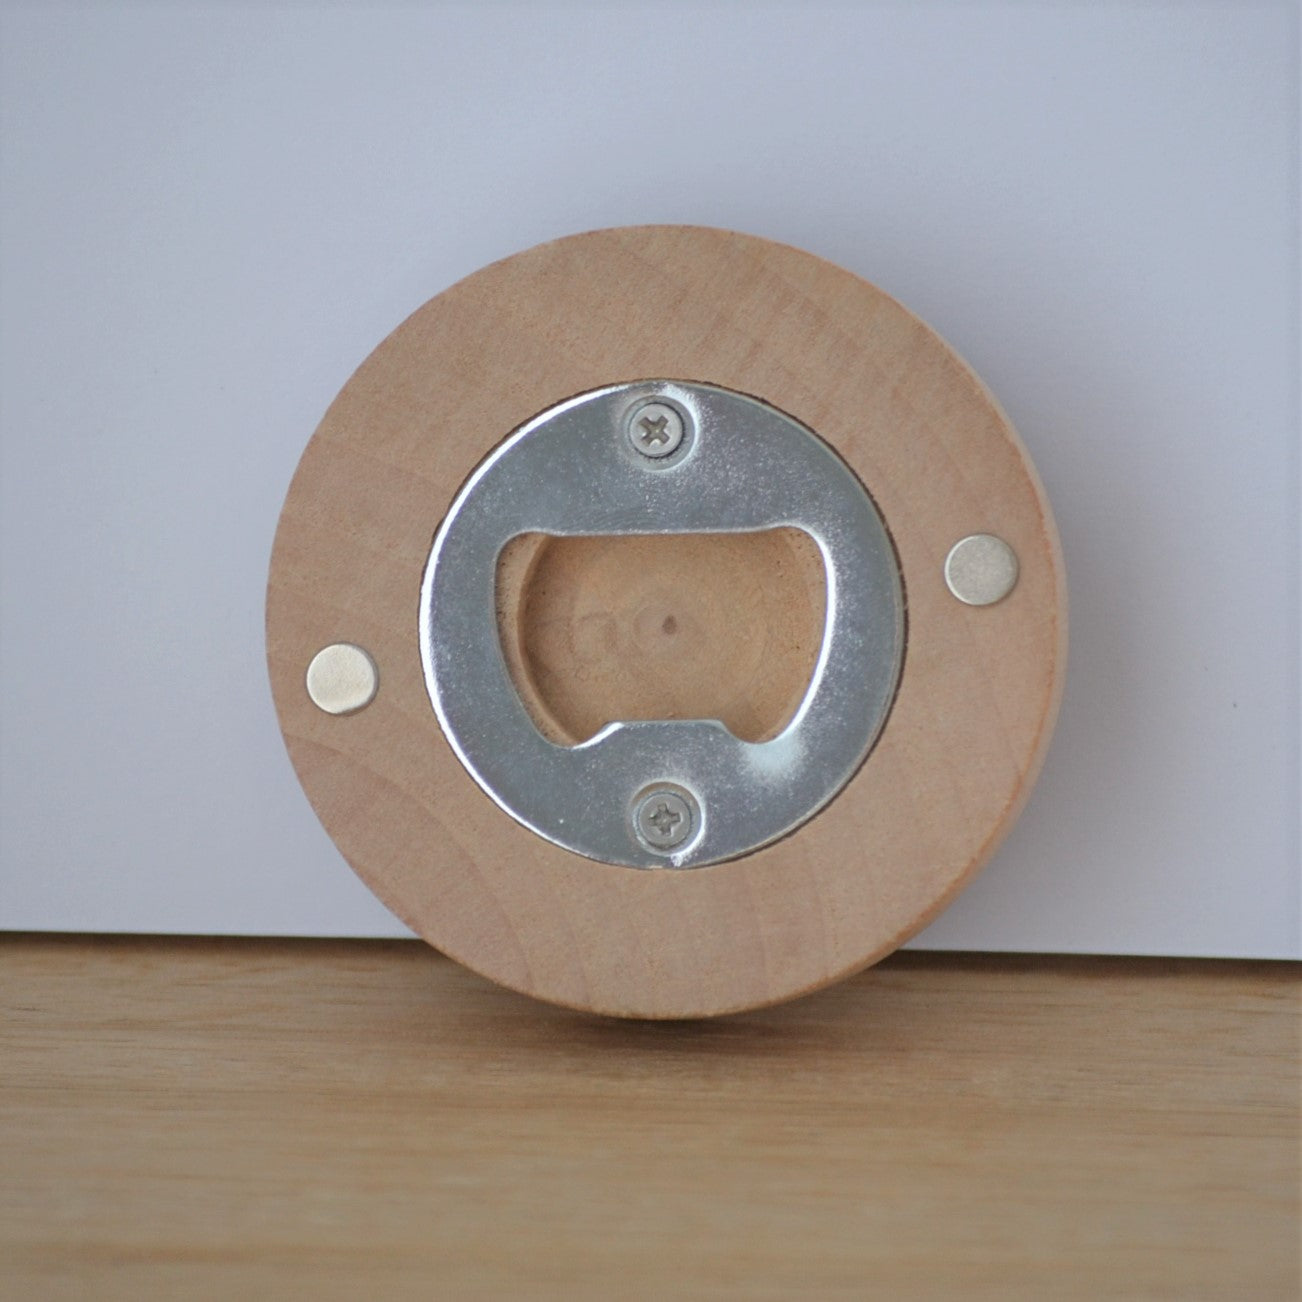 Timber bottle opener shown from back, displaying magnets